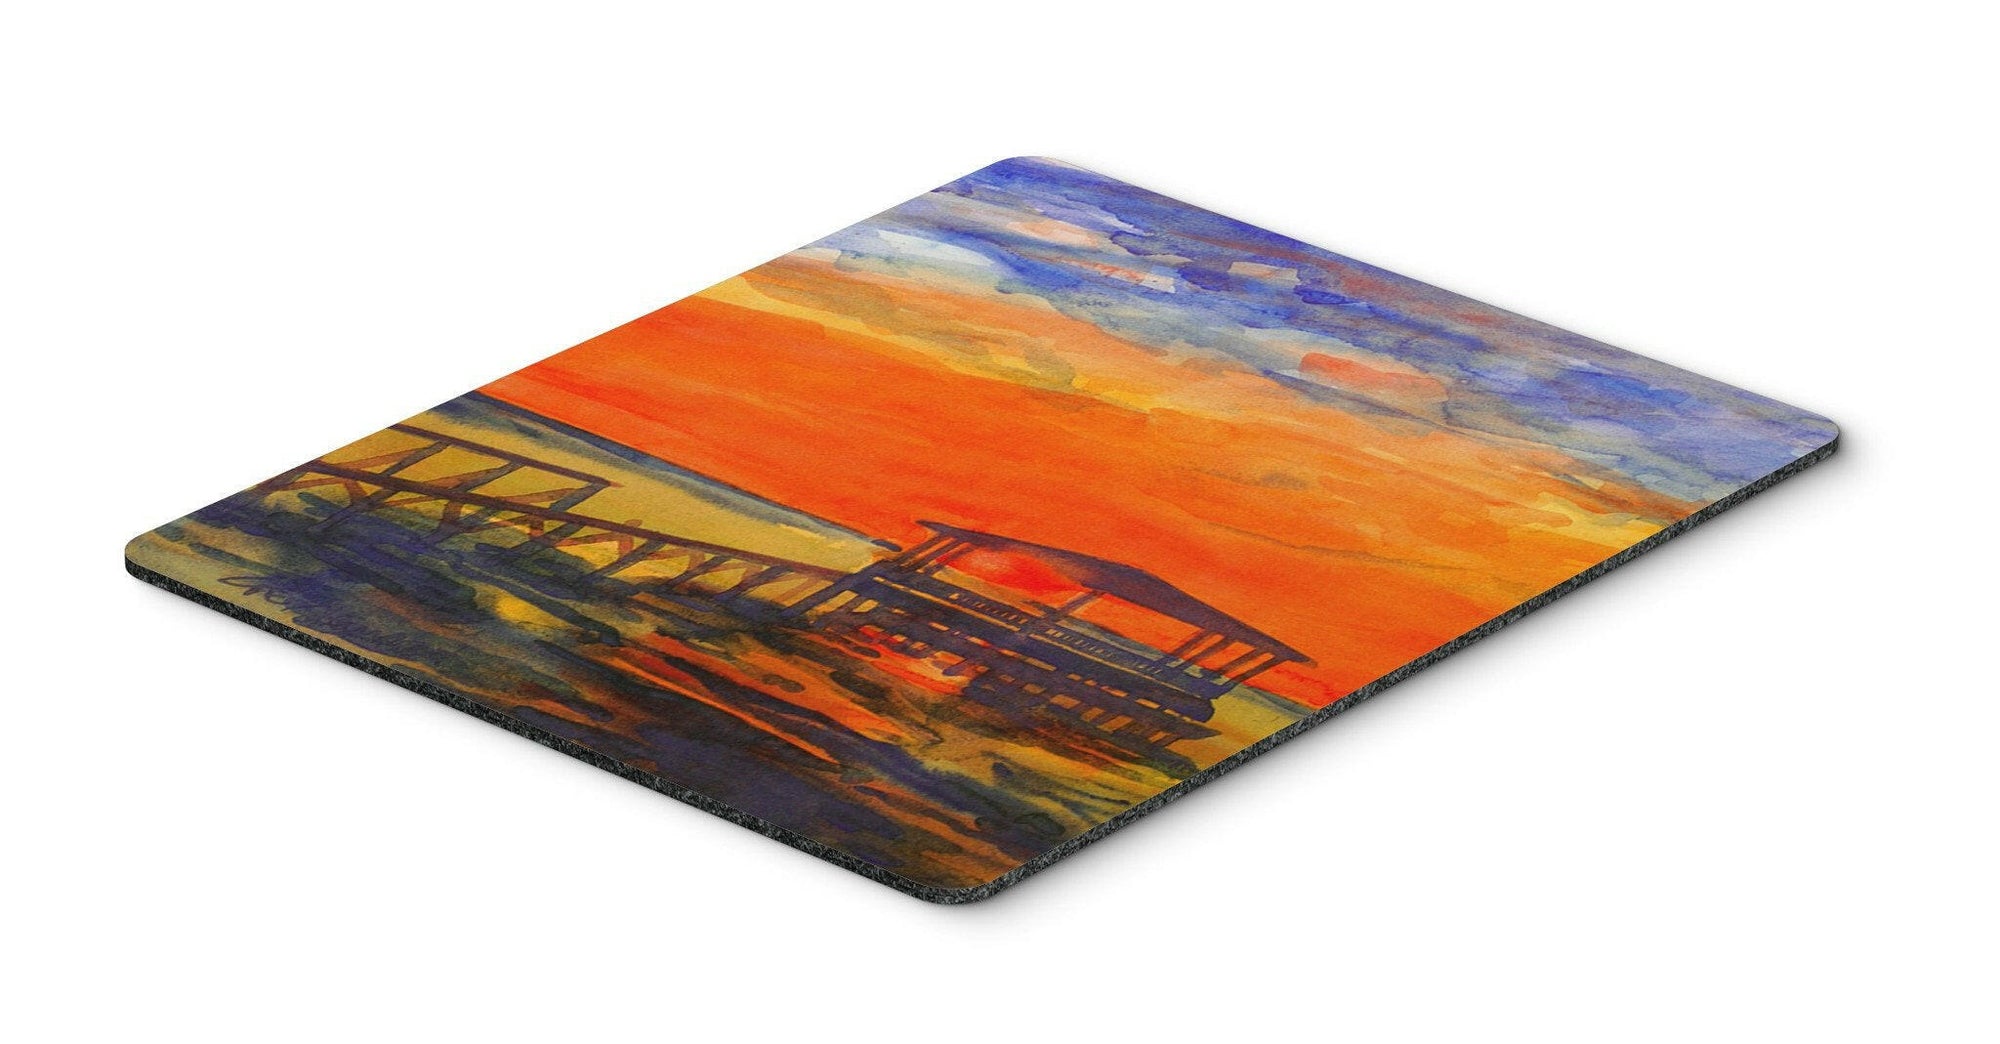 Sunset from the Dock at the pier Mouse Pad, Hot Pad or Trivet by Caroline's Treasures